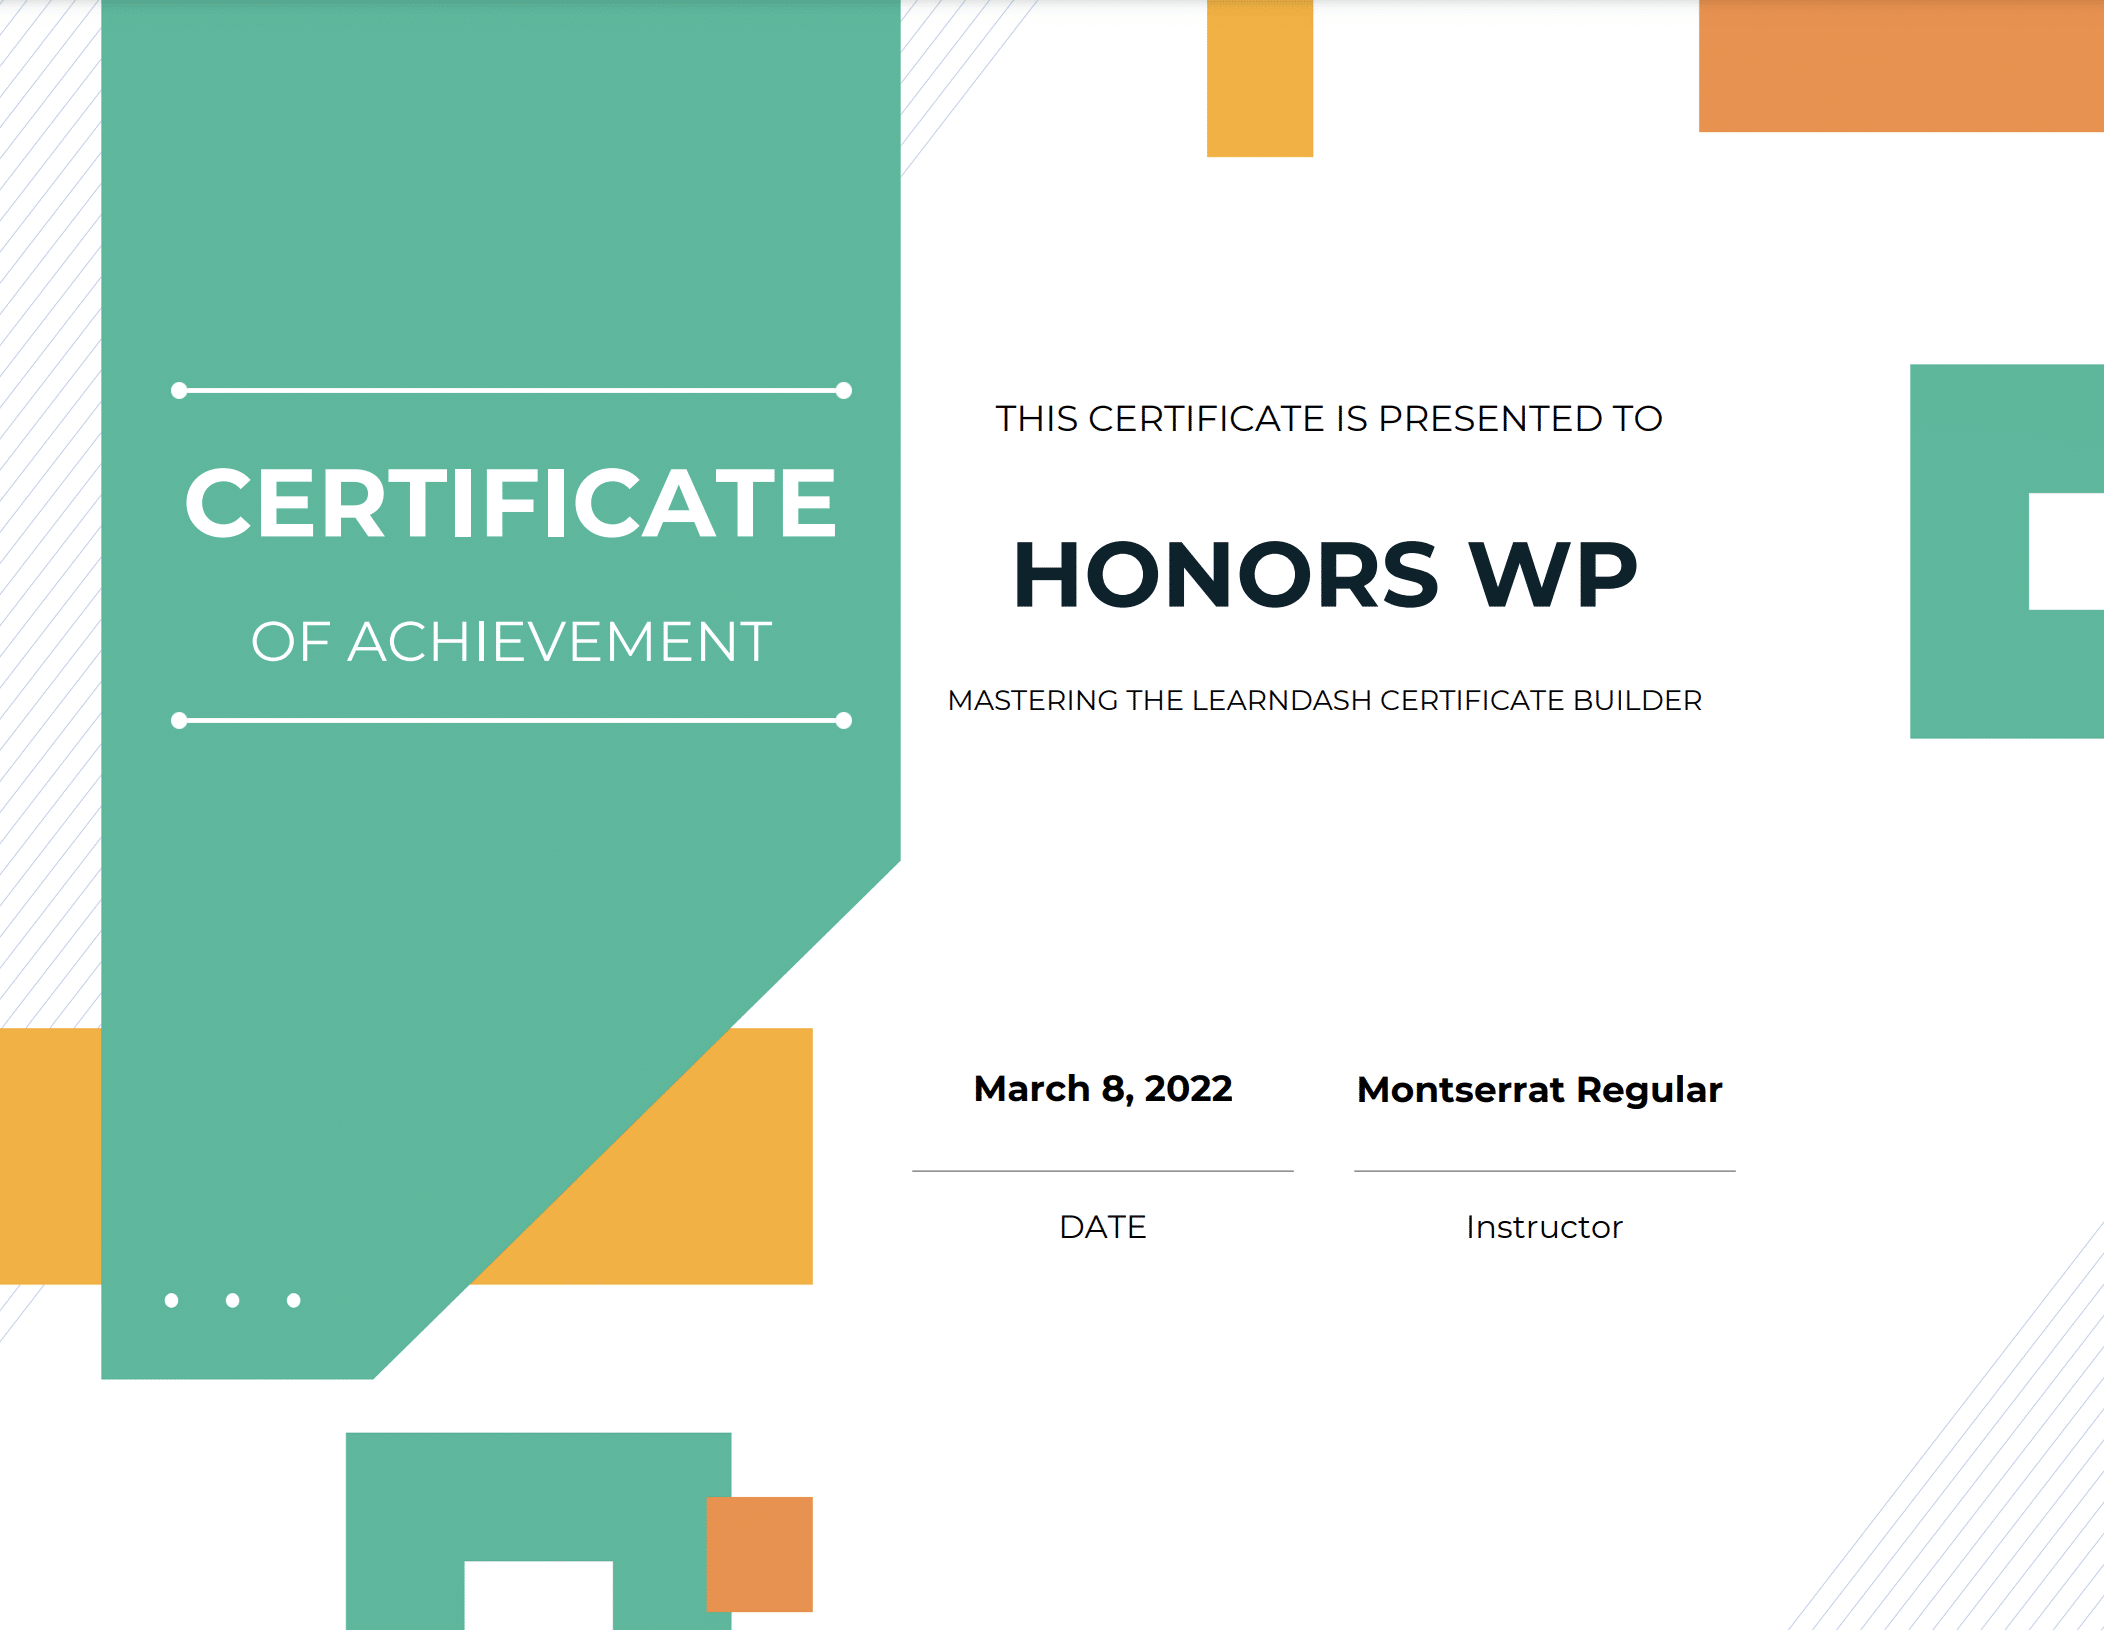 LearnDash certificate created by the Honors WP team.